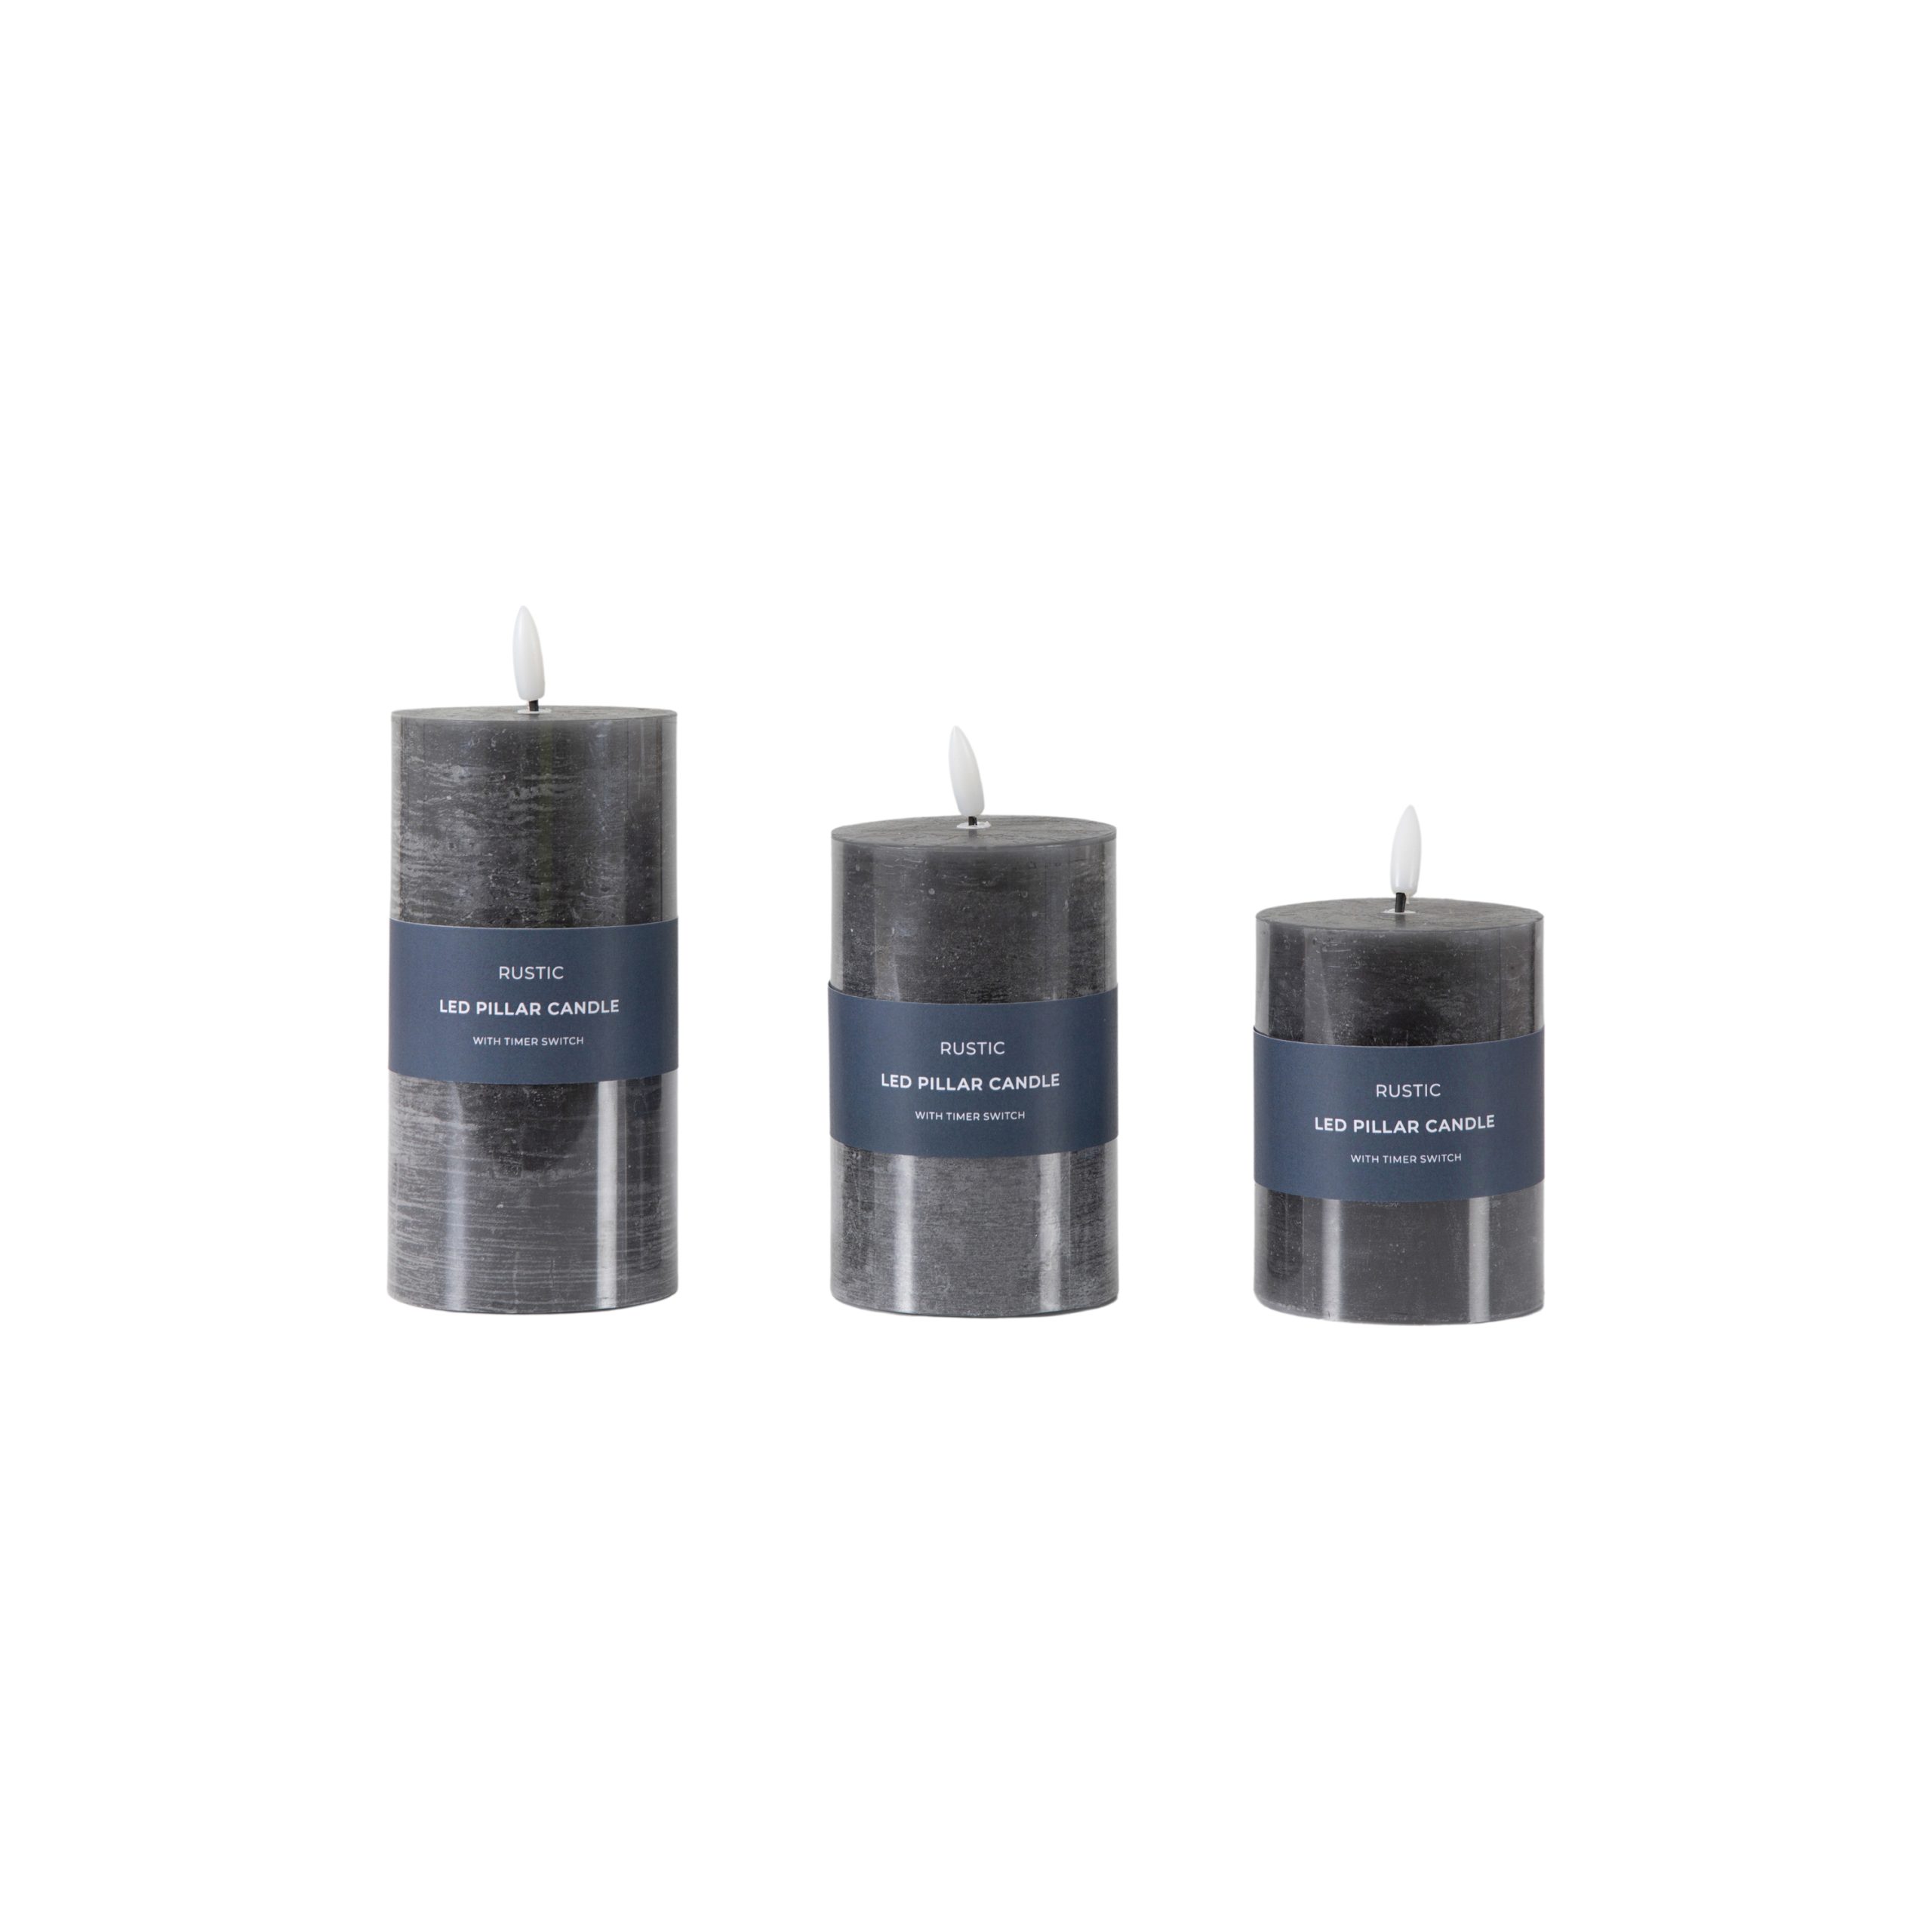 Gallery Direct LED Candle Rustic Slate (Set of 3)